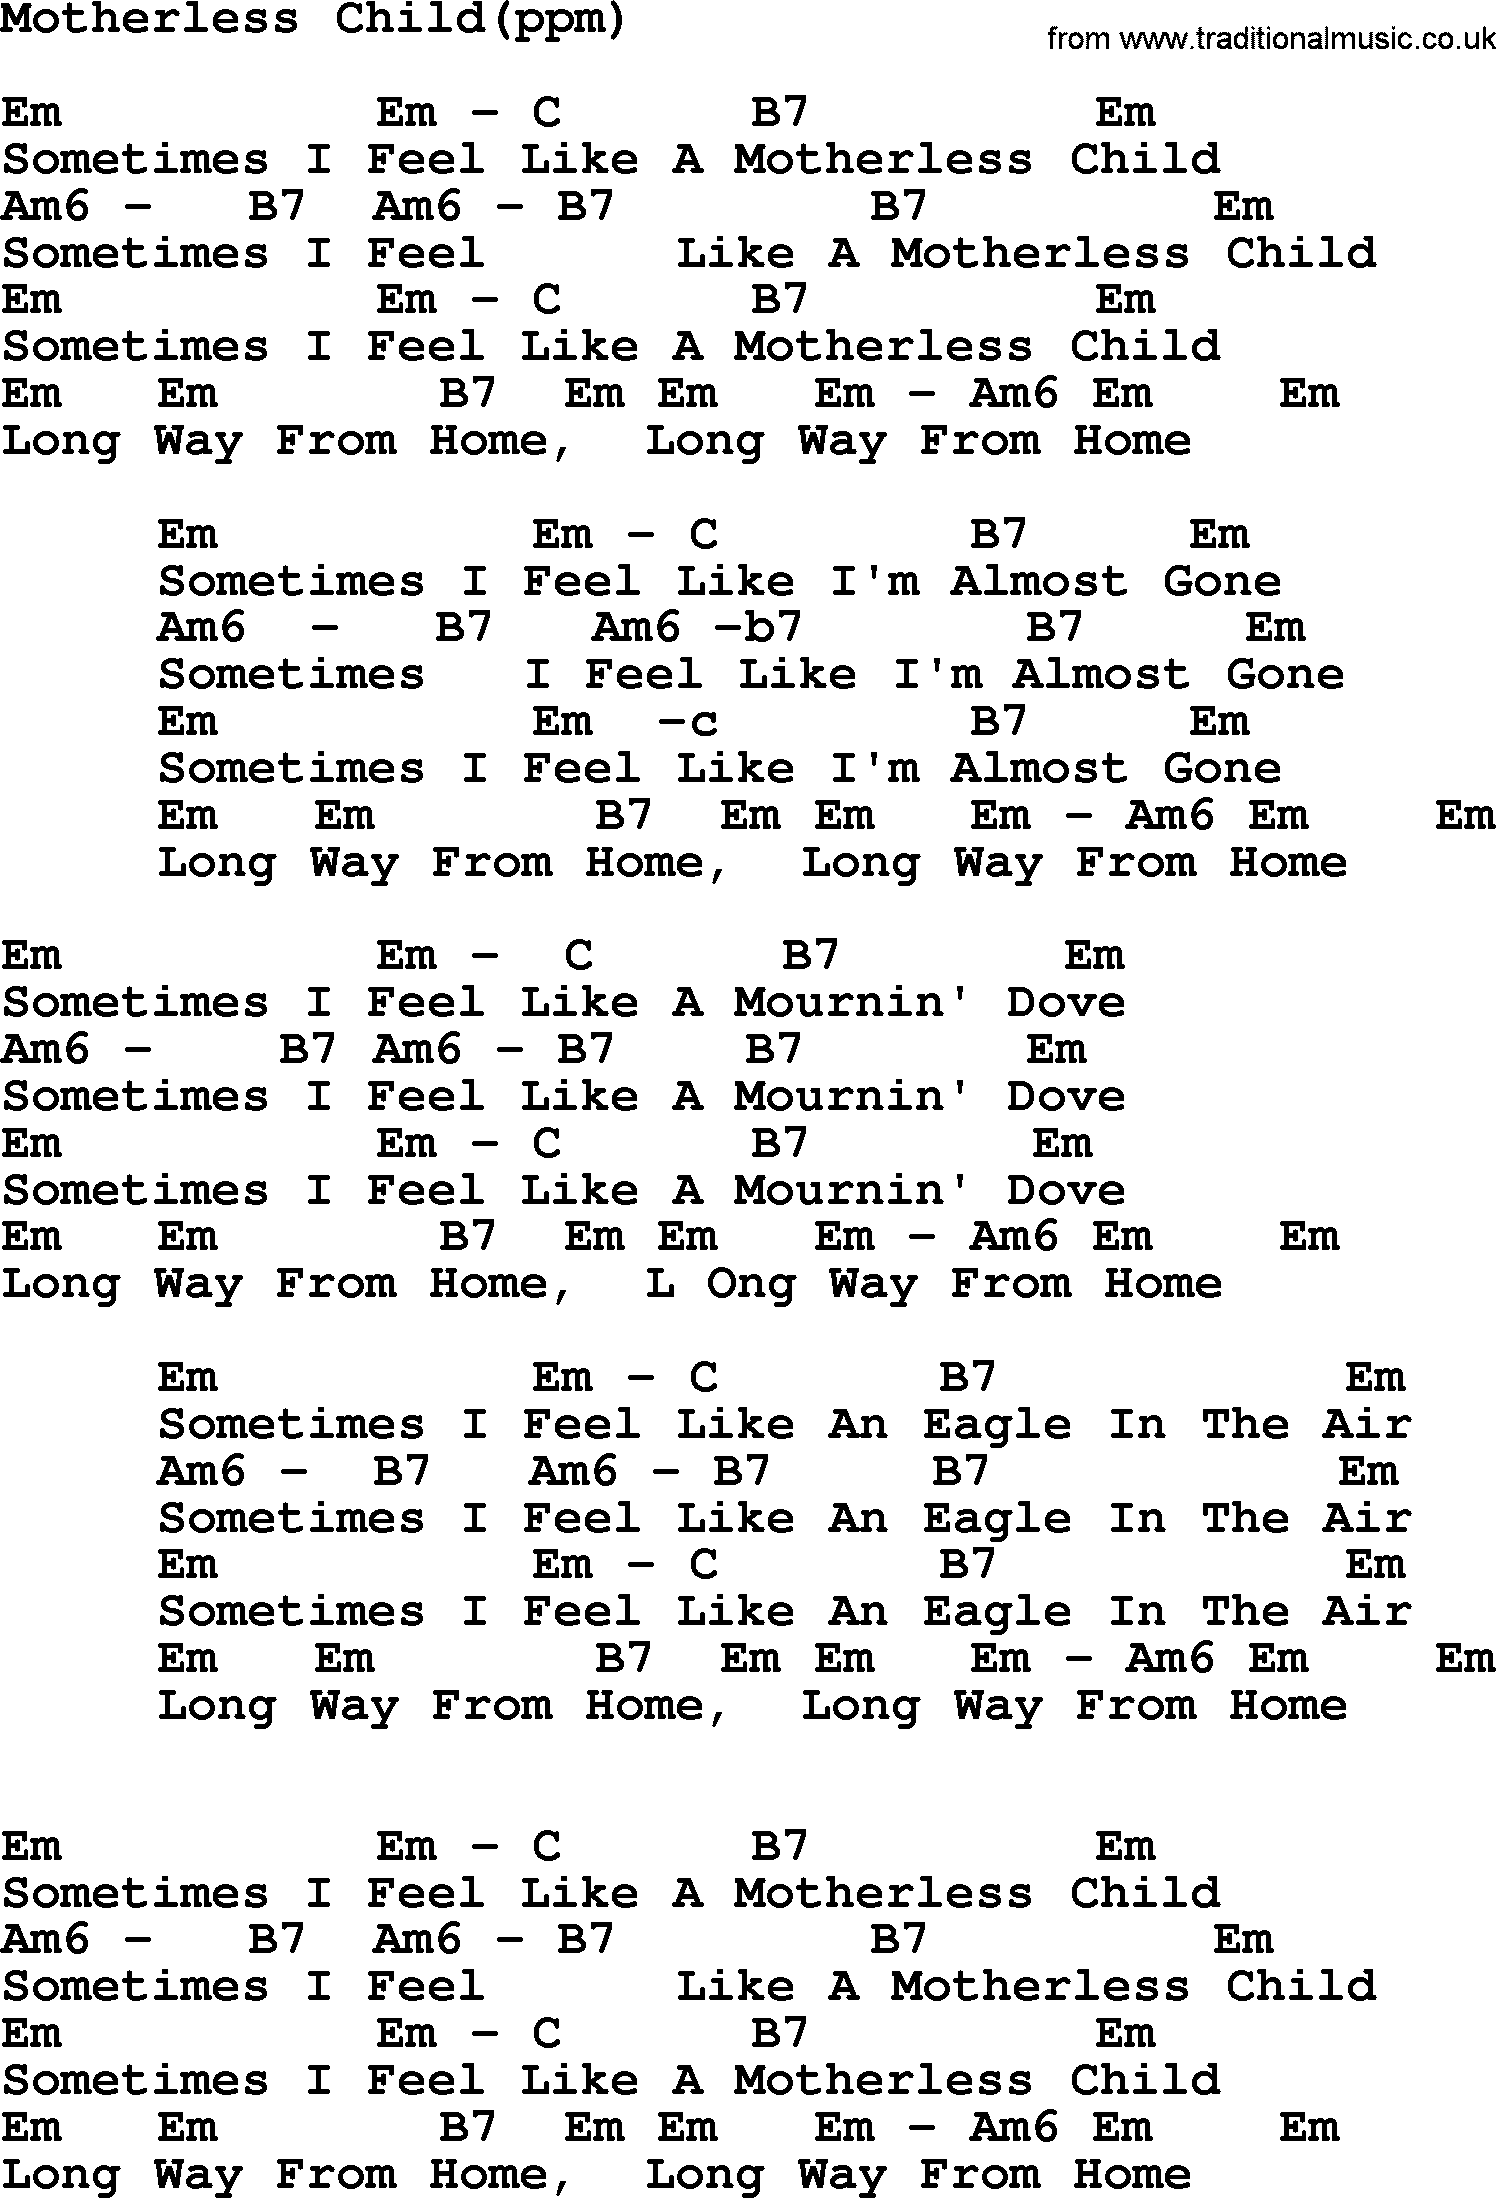 Peter, Paul and Mary song Motherless Child, lyrics and chords